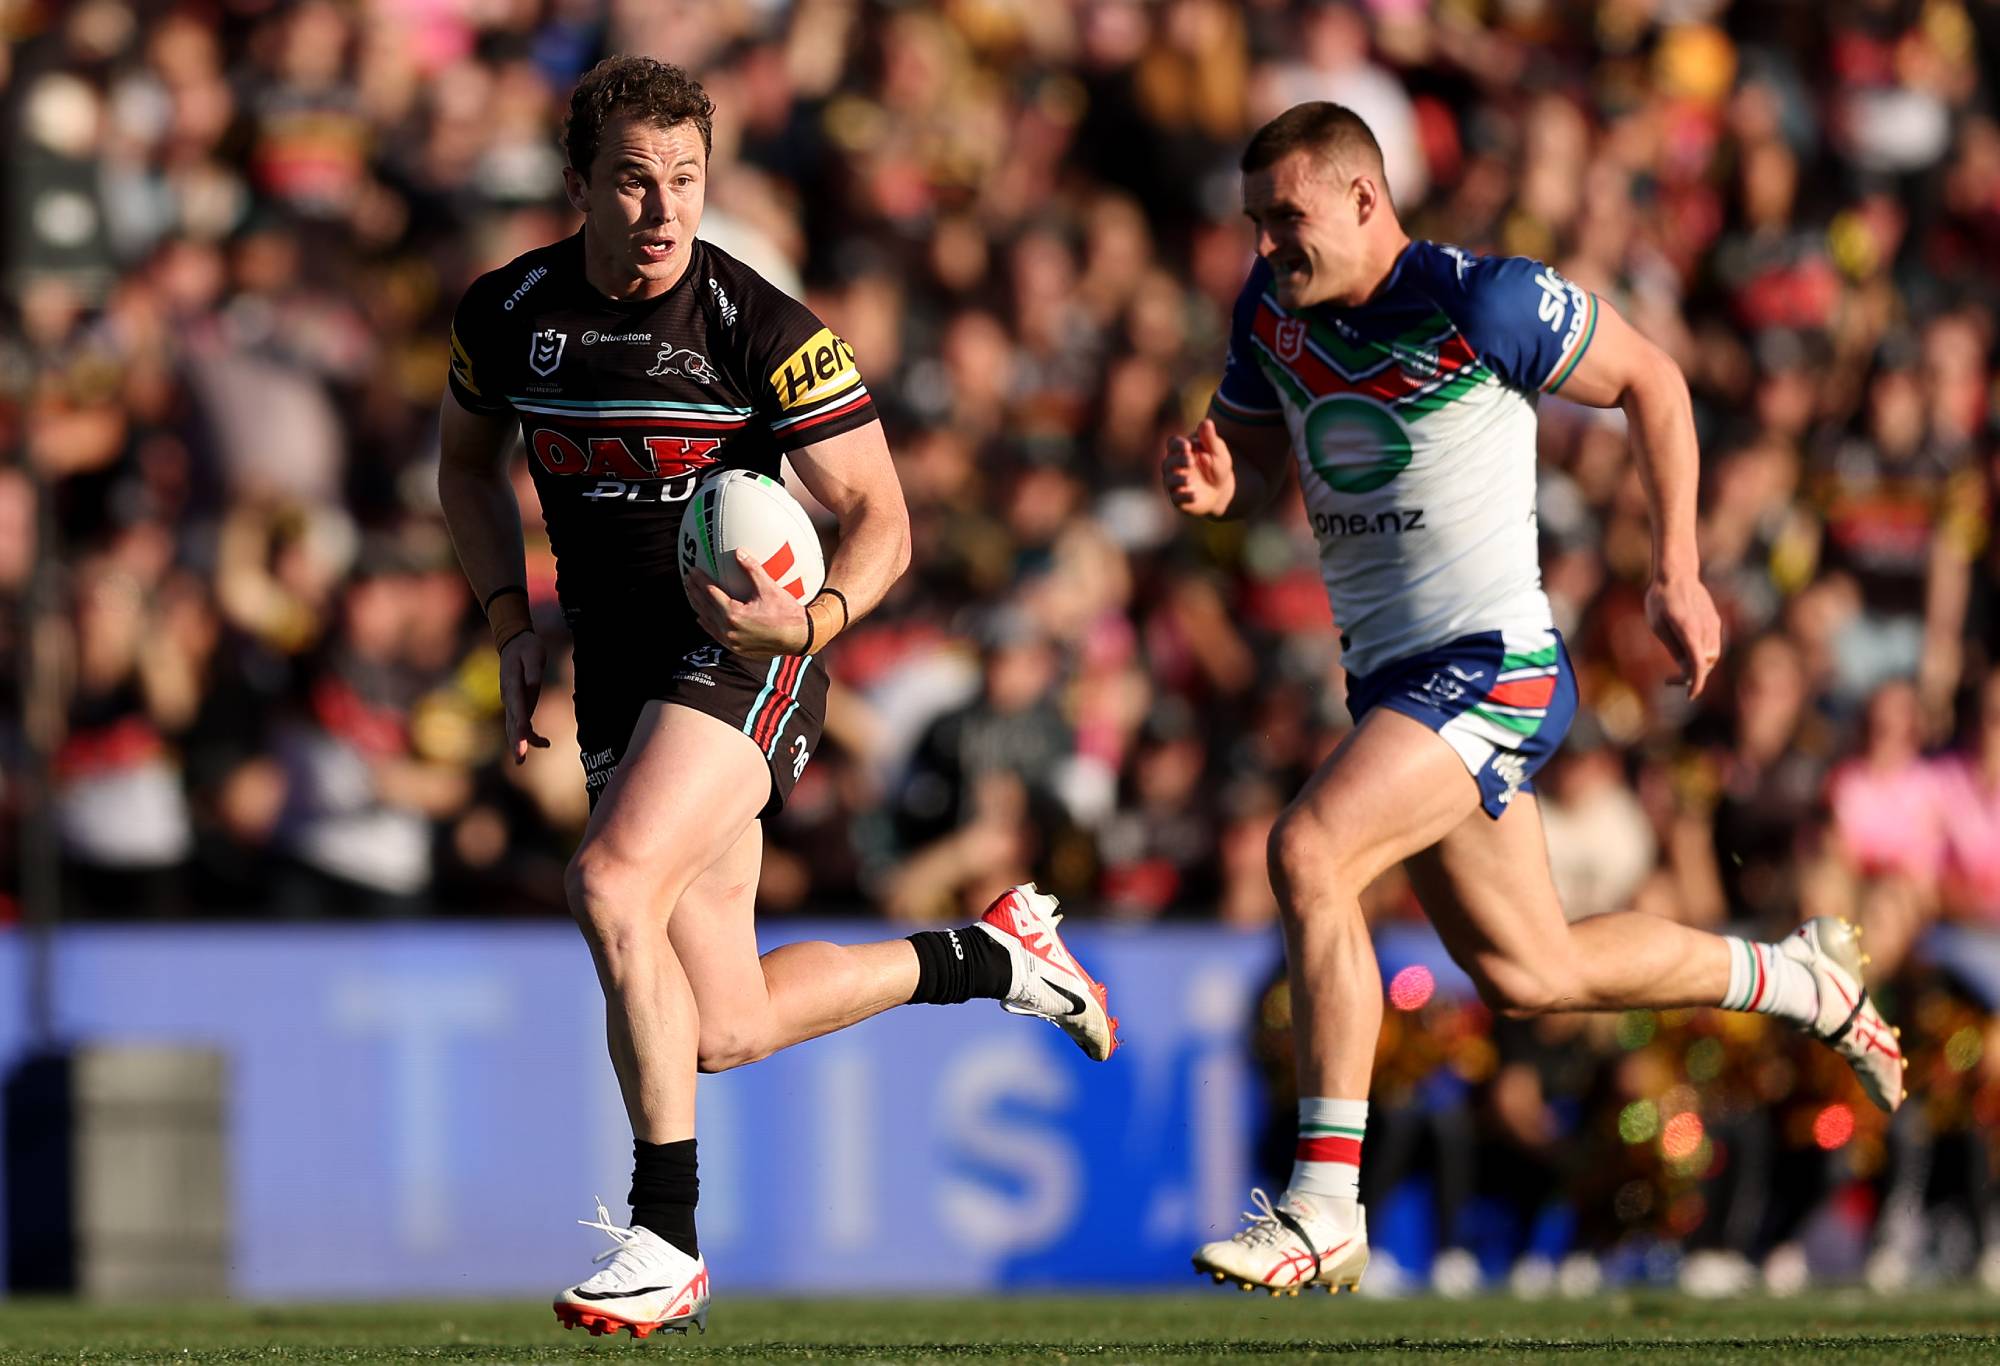 MVP Dylan Edwards is the man Penrith’s system might not be able to cover